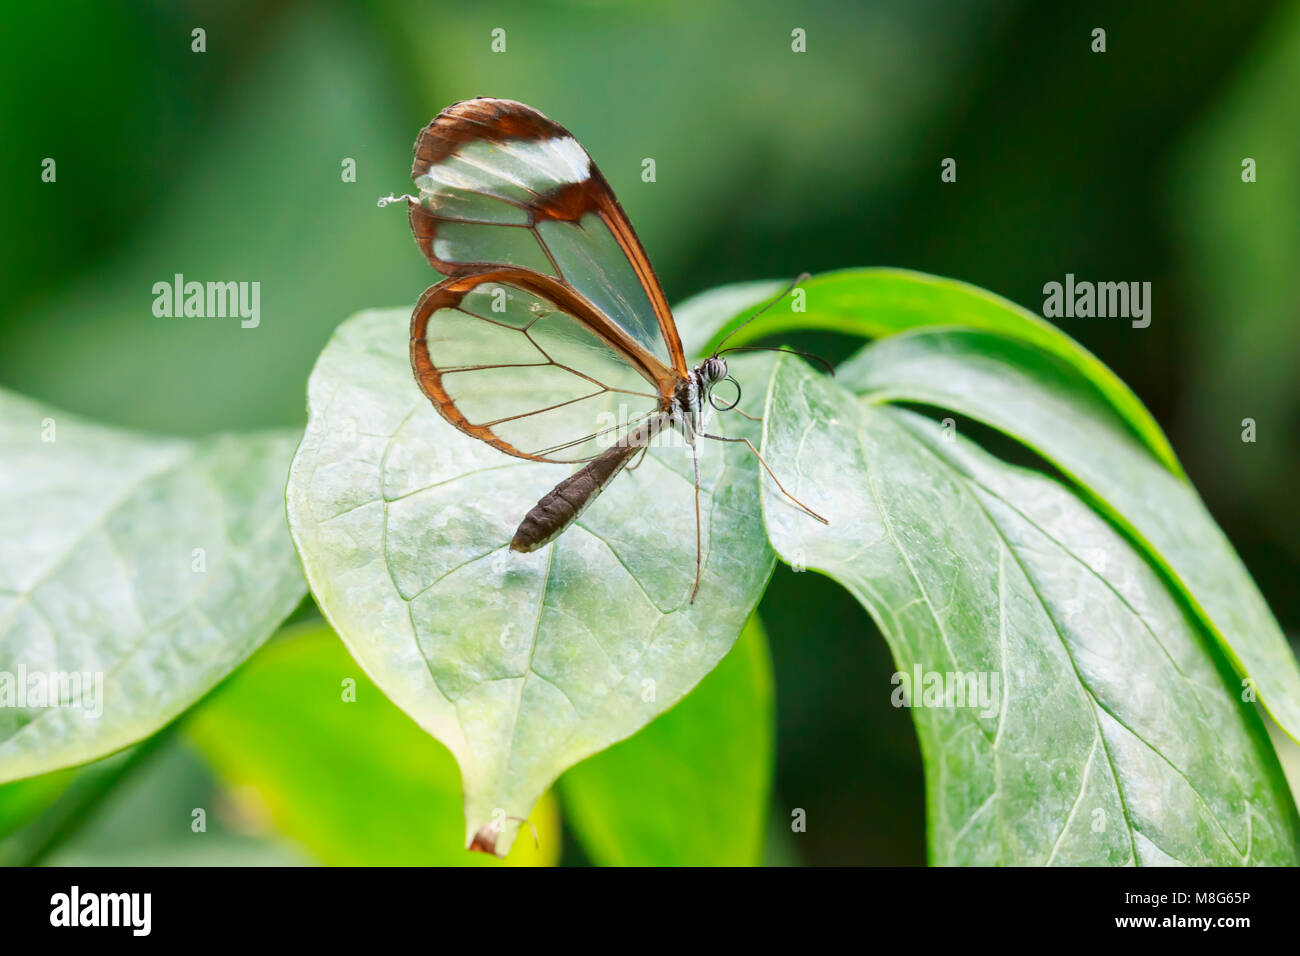 Close up portrait of a Greta oto, the glasswinged butterfly or glasswing. The background is brightly lit and vibrant colored. Stock Photo